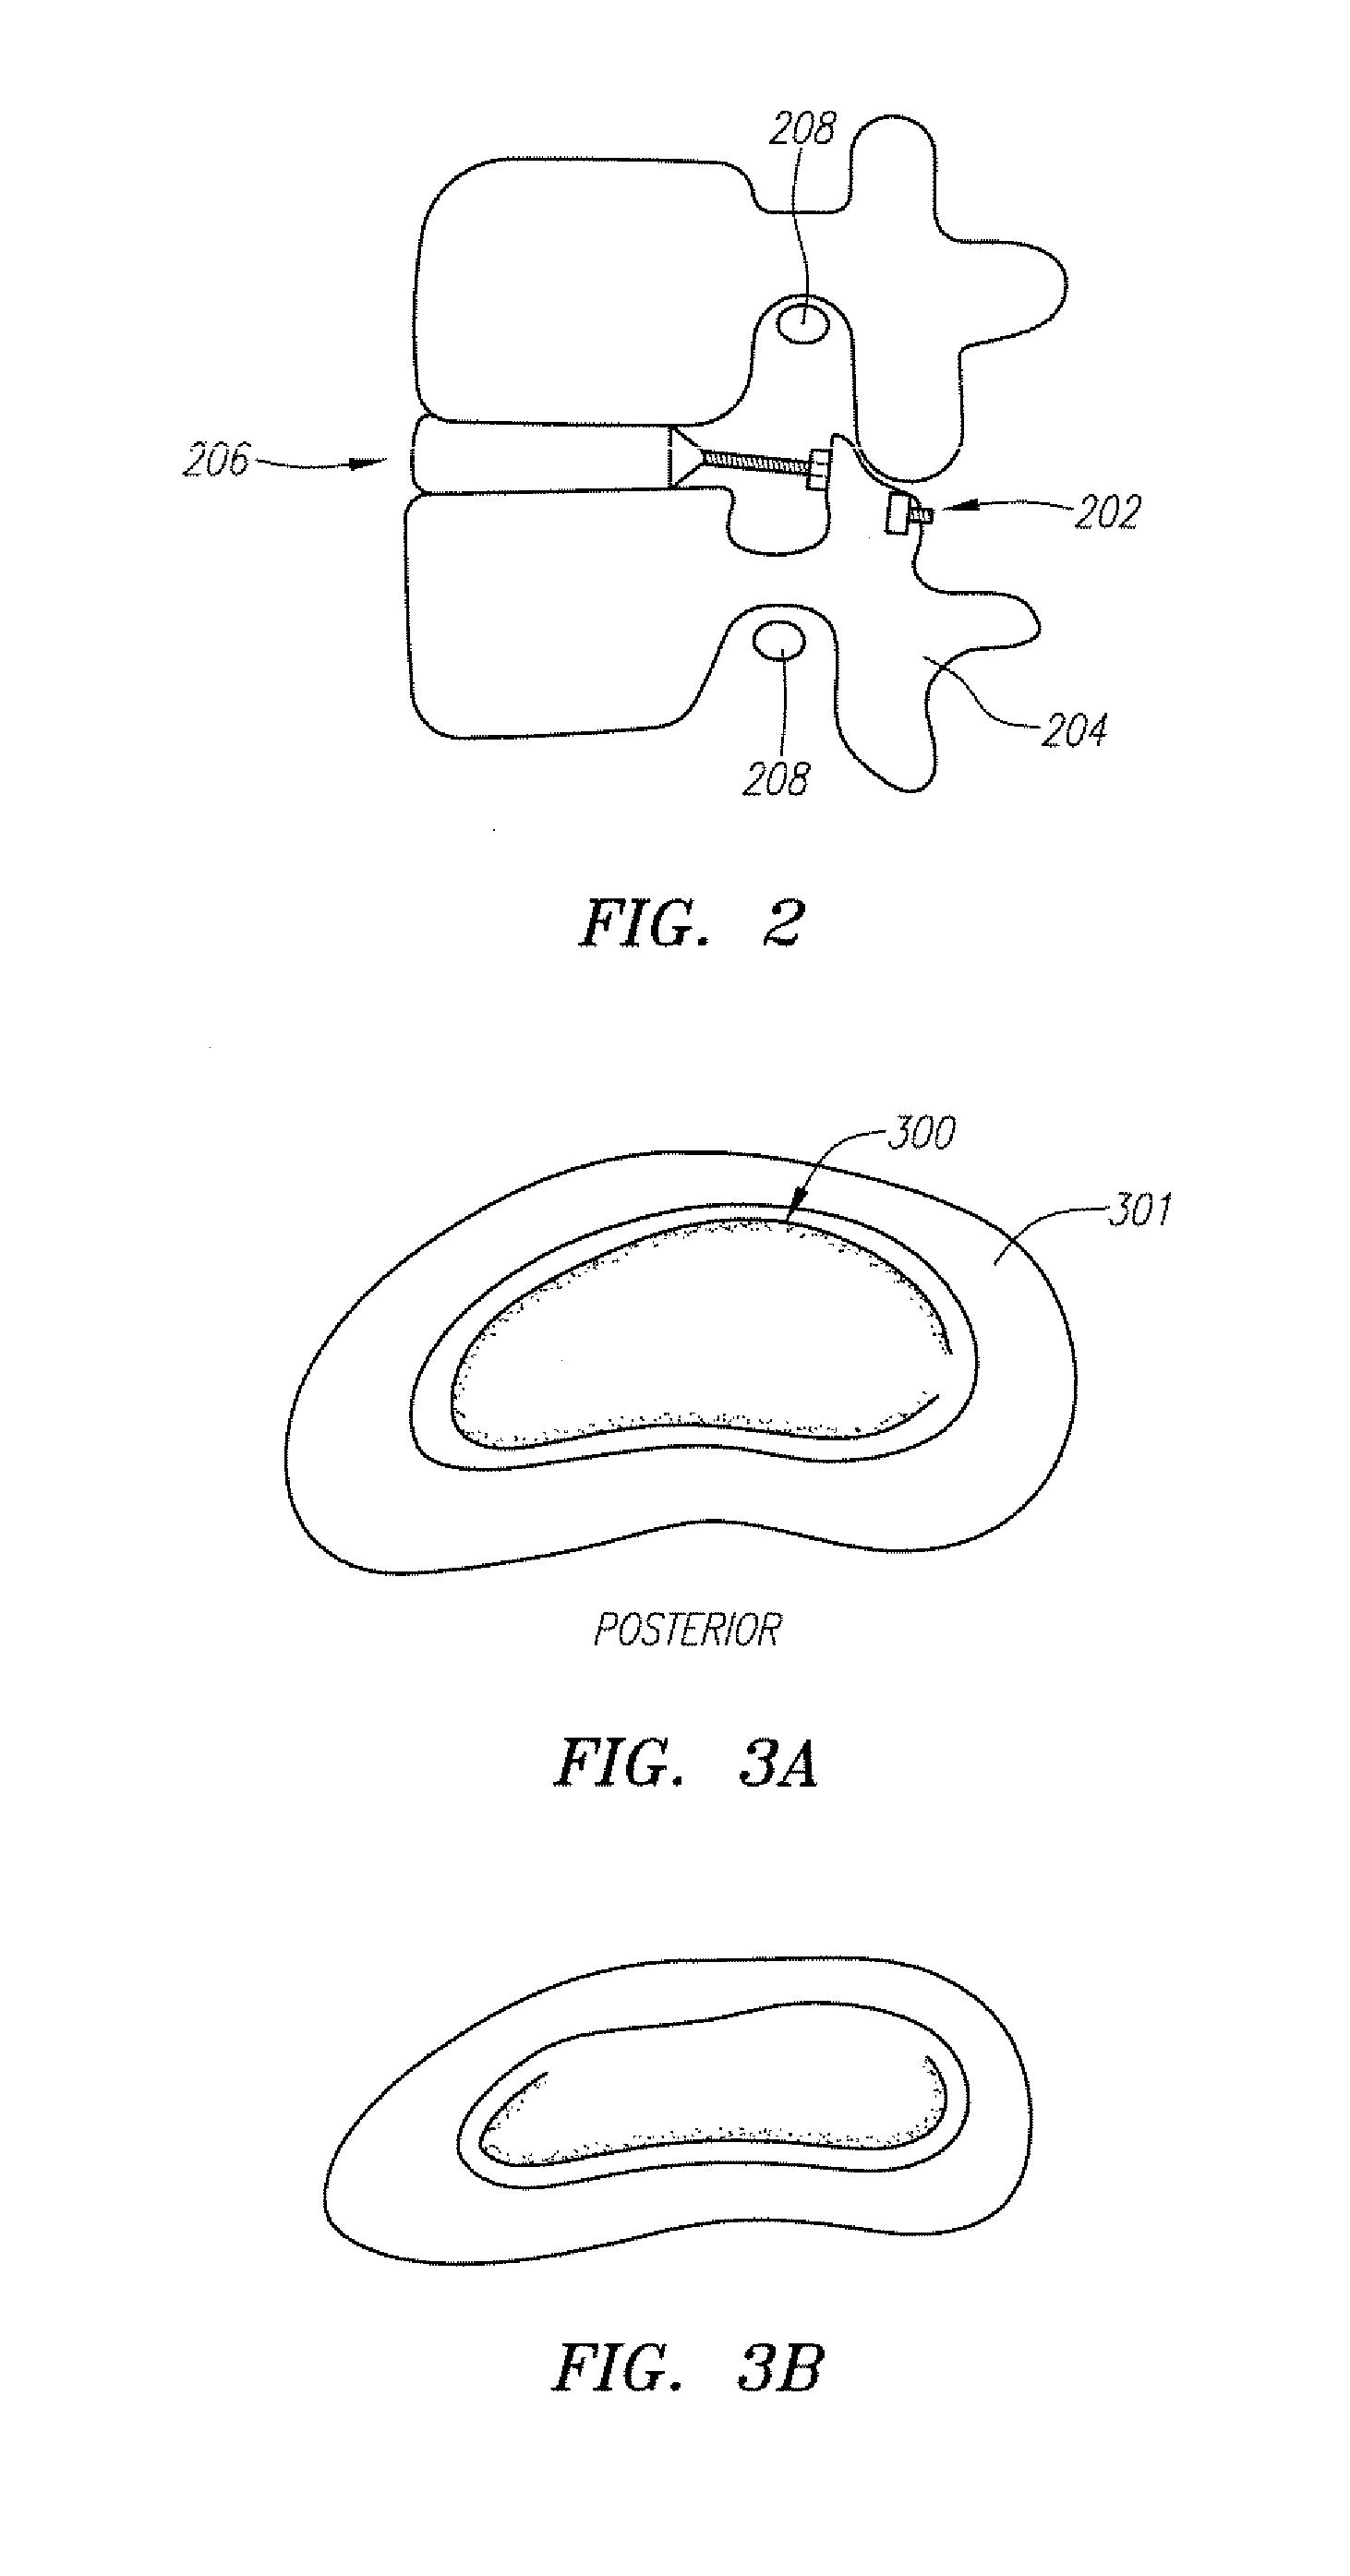 Devices used to treat disc herniation and attachment mechanisms therefore